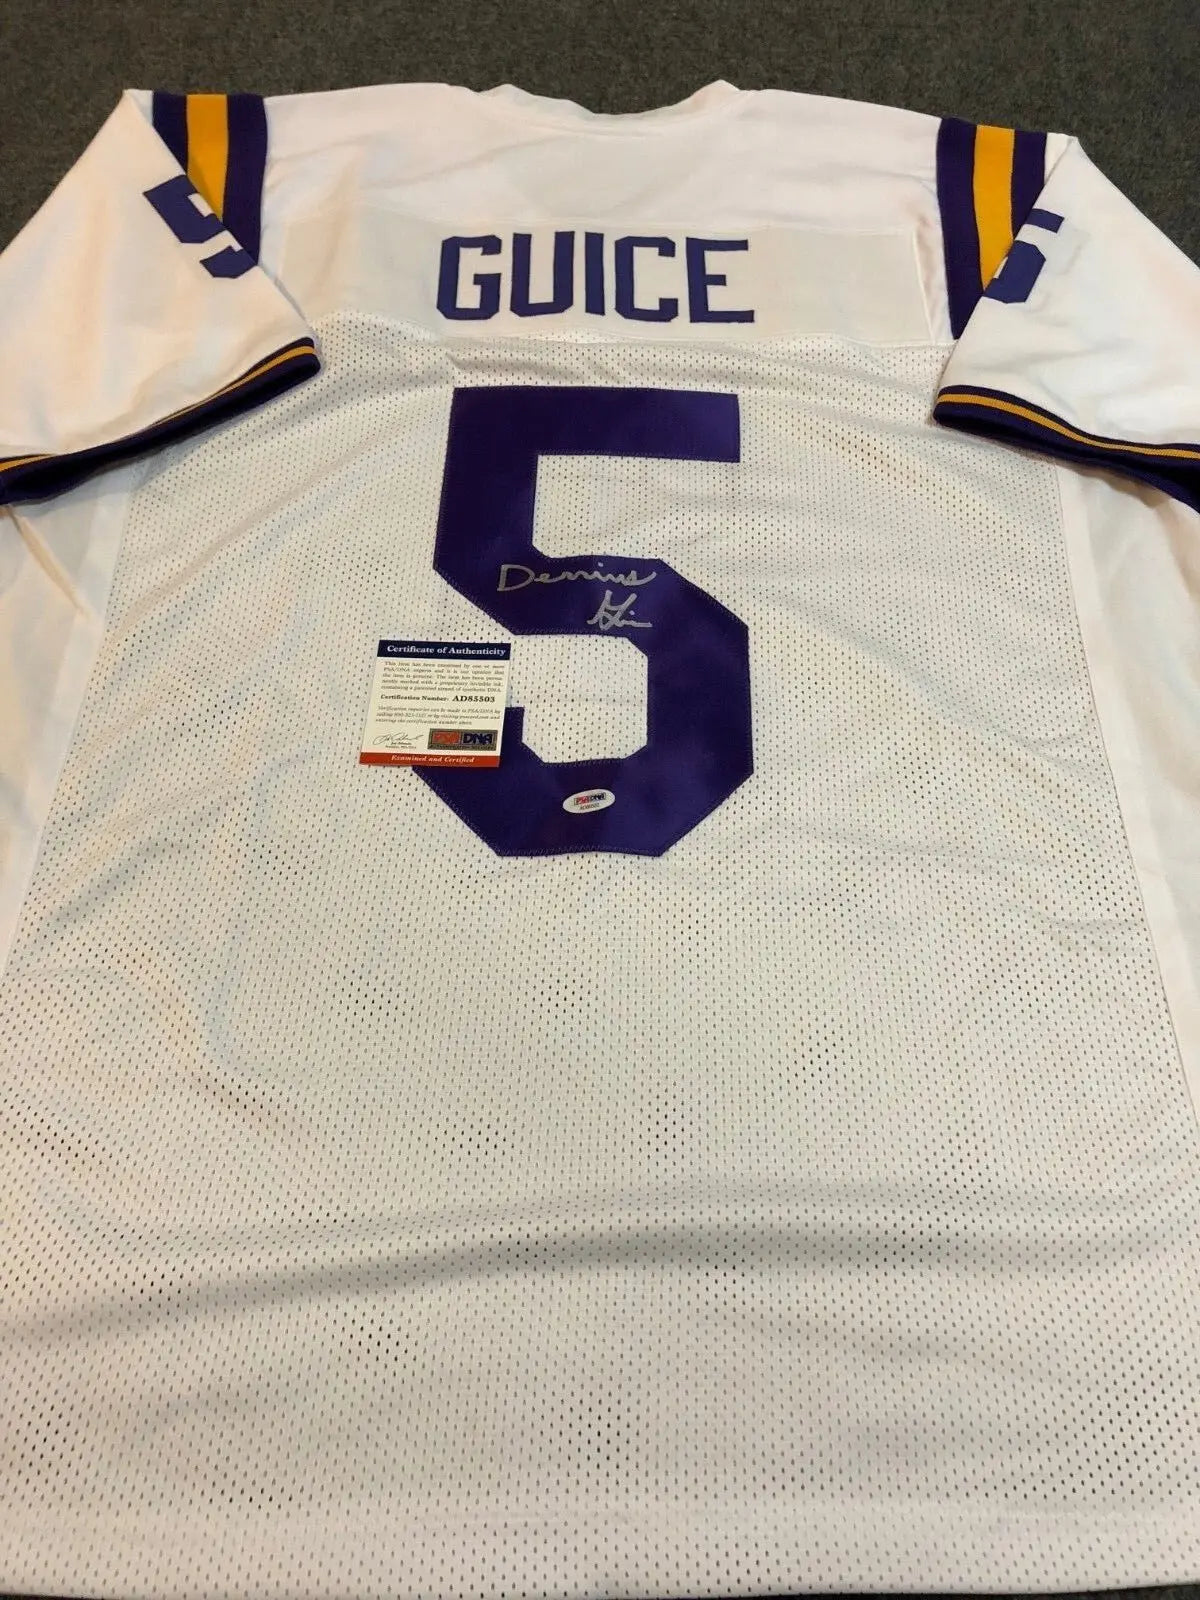 MVP Authentics Lsu Tigers Derrius Guice Autographed Signed Jersey Psa  Coa 116.10 sports jersey framing , jersey framing